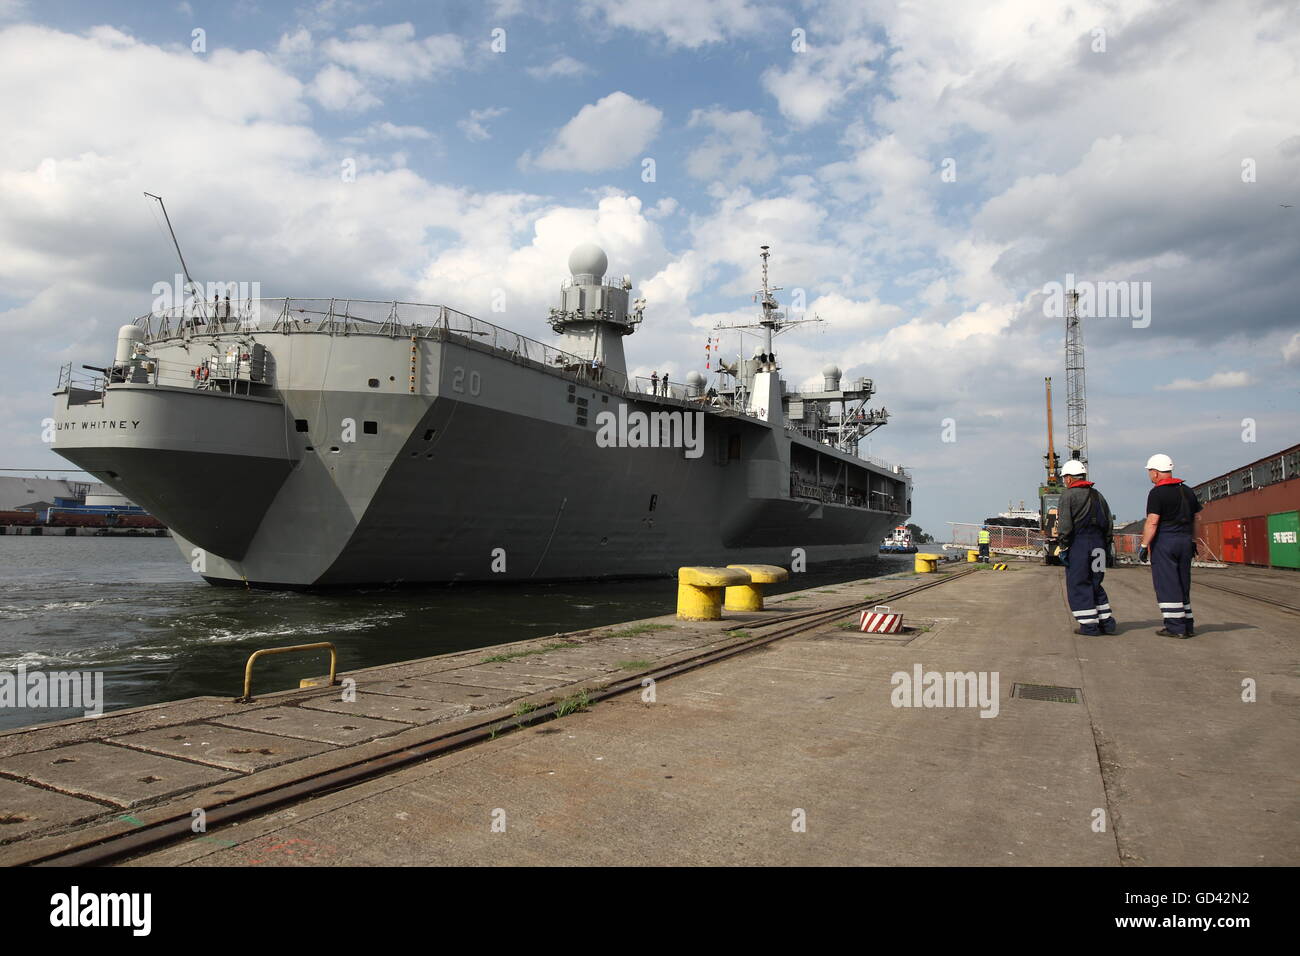 Gdynia, Poland 12th, July 2016 US Navy Ship USS Mount Whitney (LCC-20), a Blue Ridge class command ship,  visits the port of Gdynia for a routine port visit. The vessel with its 300 crew members took part in the international military exercise Ð BALTOPS16 in the Baltic Sea as a command ship.  During the visit to Gdynia the crew will take part in a series of community events and will play in a soccer match with representatives of the Polish Navy. Stock Photo